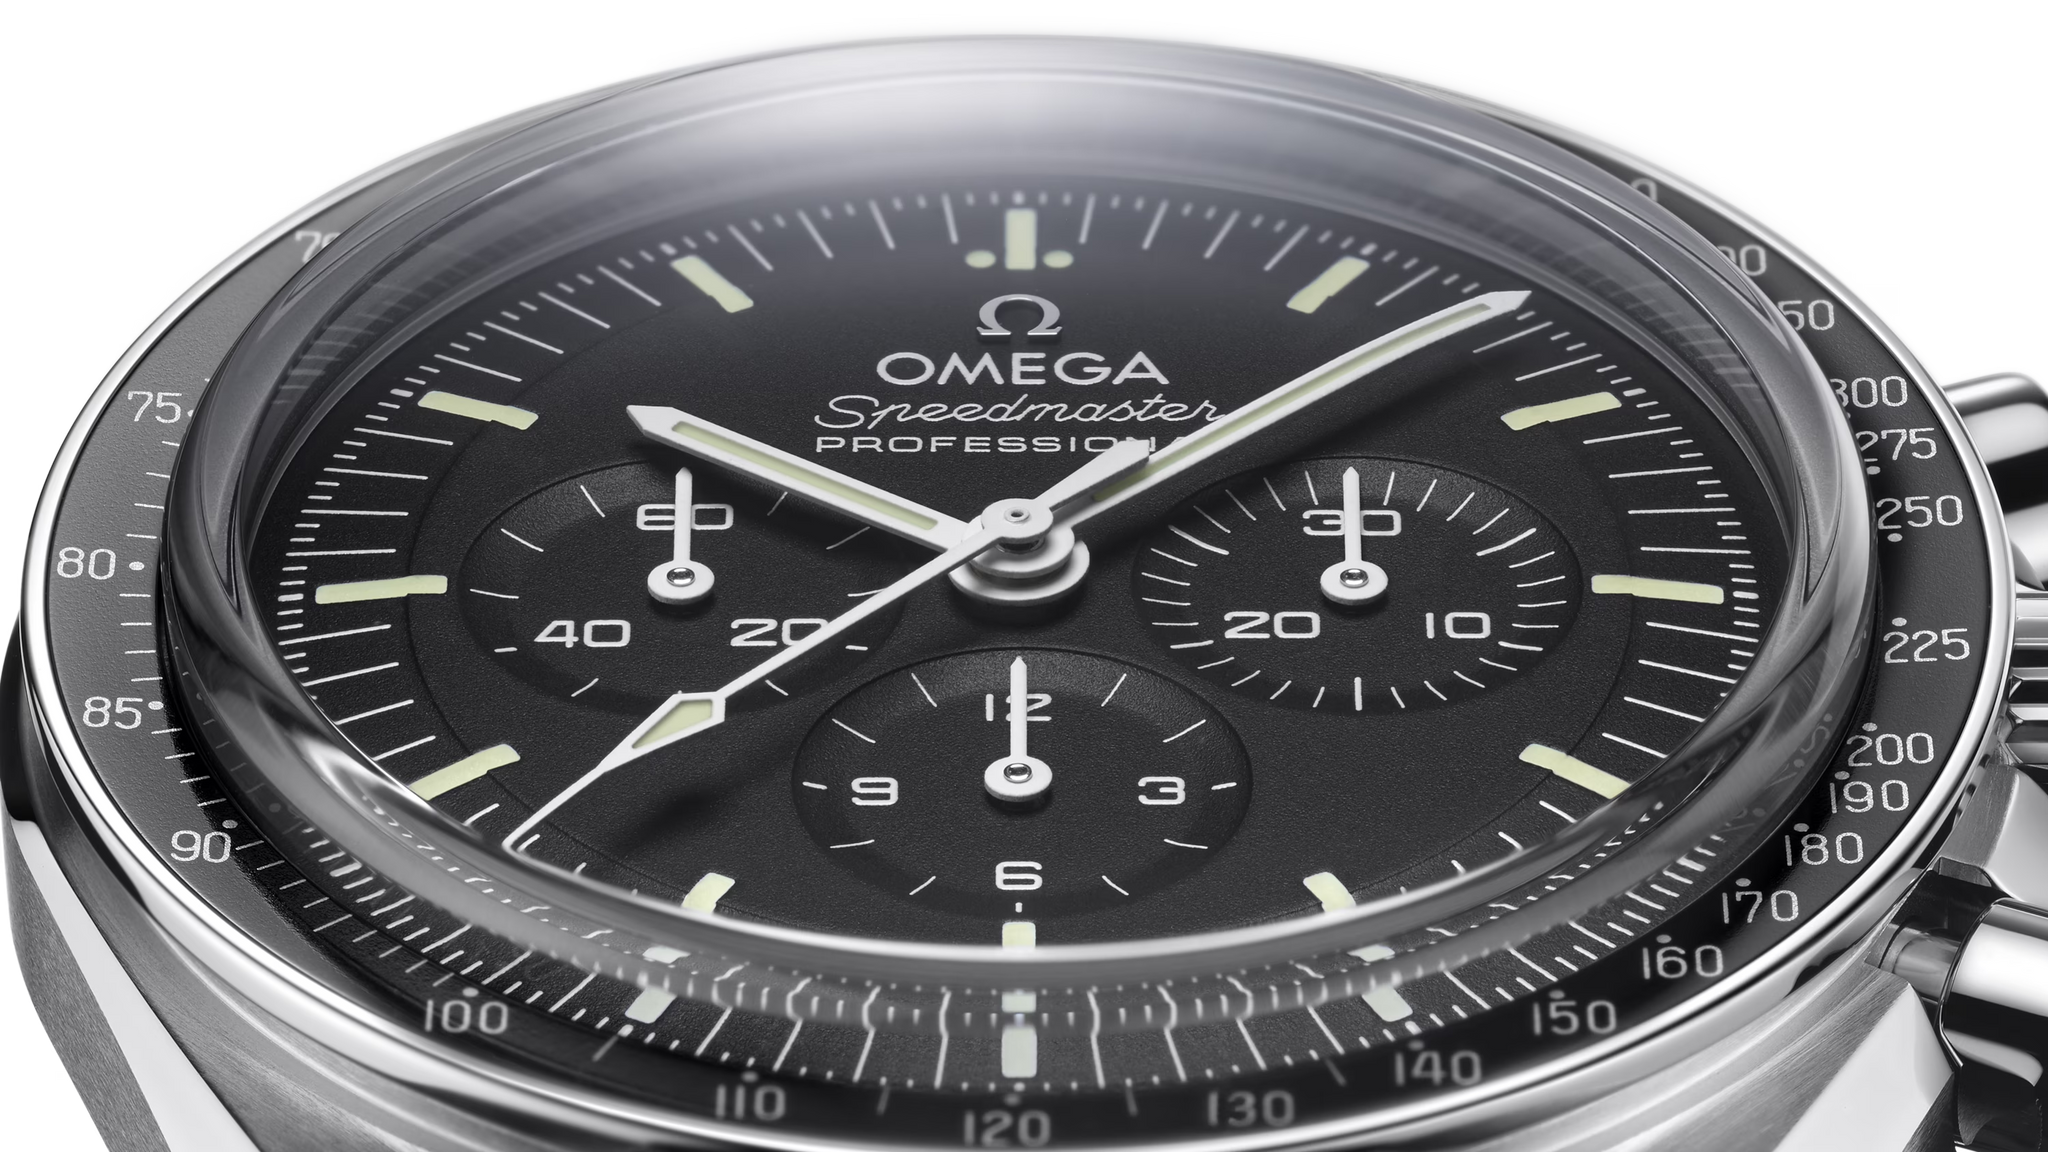 OMEGA-SPEEDMASTER MOONWATCH PROFESSIONAL CO‑AXIAL MASTER CHRONOMETER CHRONOGRAPH 42 MM 310.30.42.50.01.002